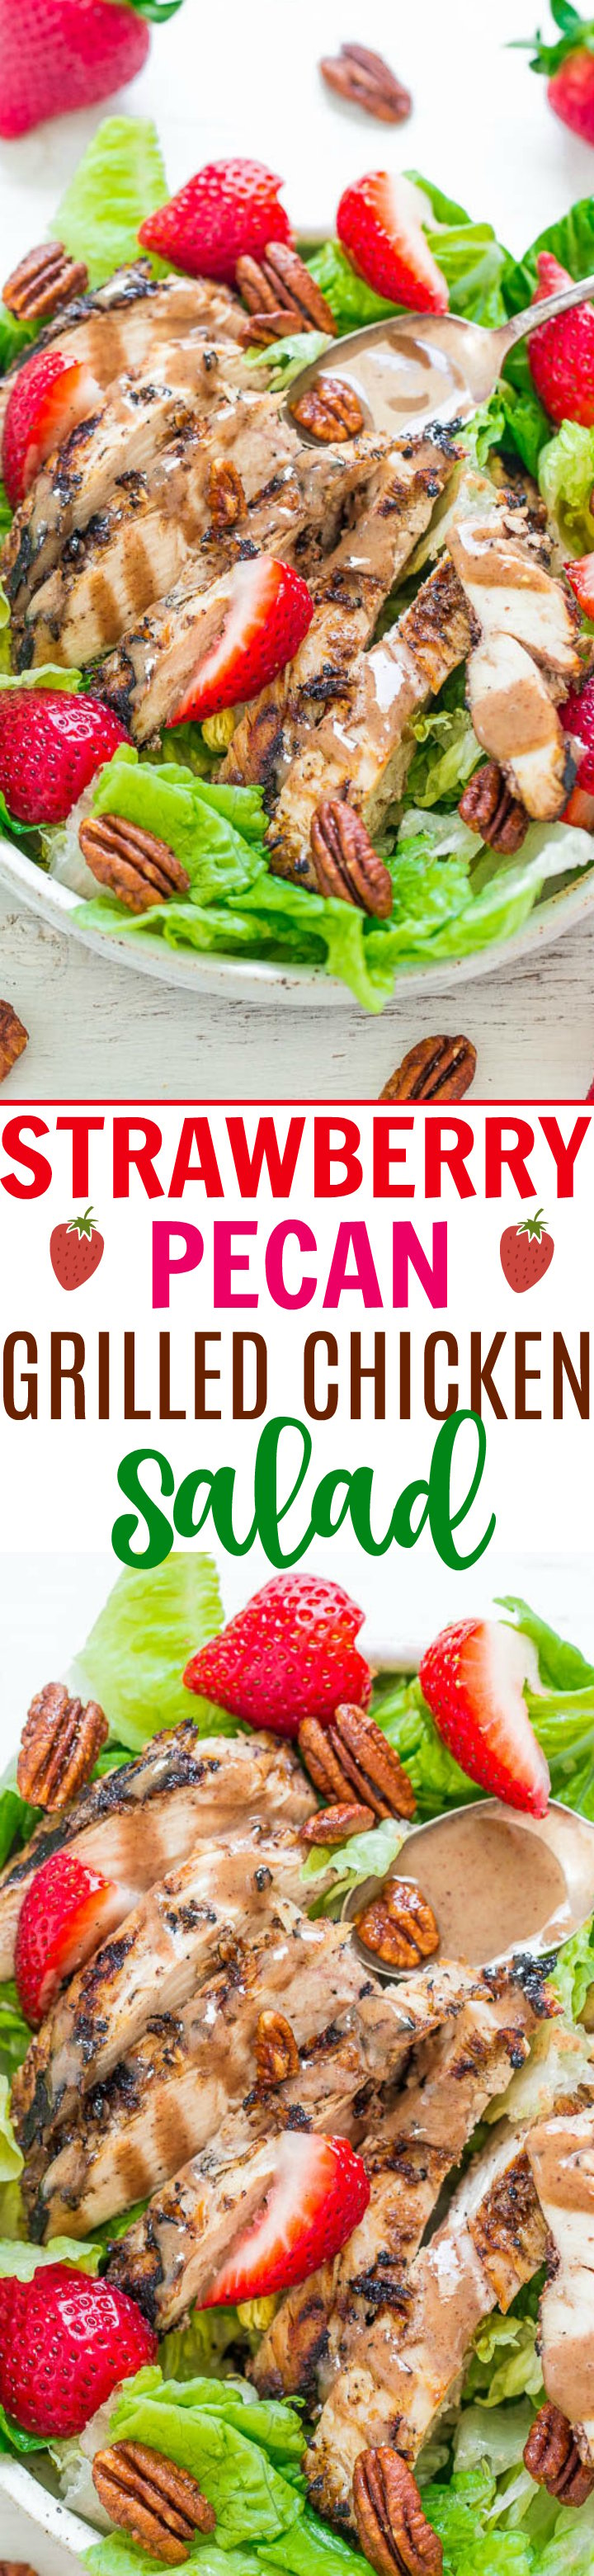 Pecan Strawberry Chicken Salad with Pecan Butter Vinaigrette - The chicken is so JUICY and moist thanks to a homemade pecan butter marinade!! Sweet strawberries and crunchy pecans add extra texture and FLAVOR!!